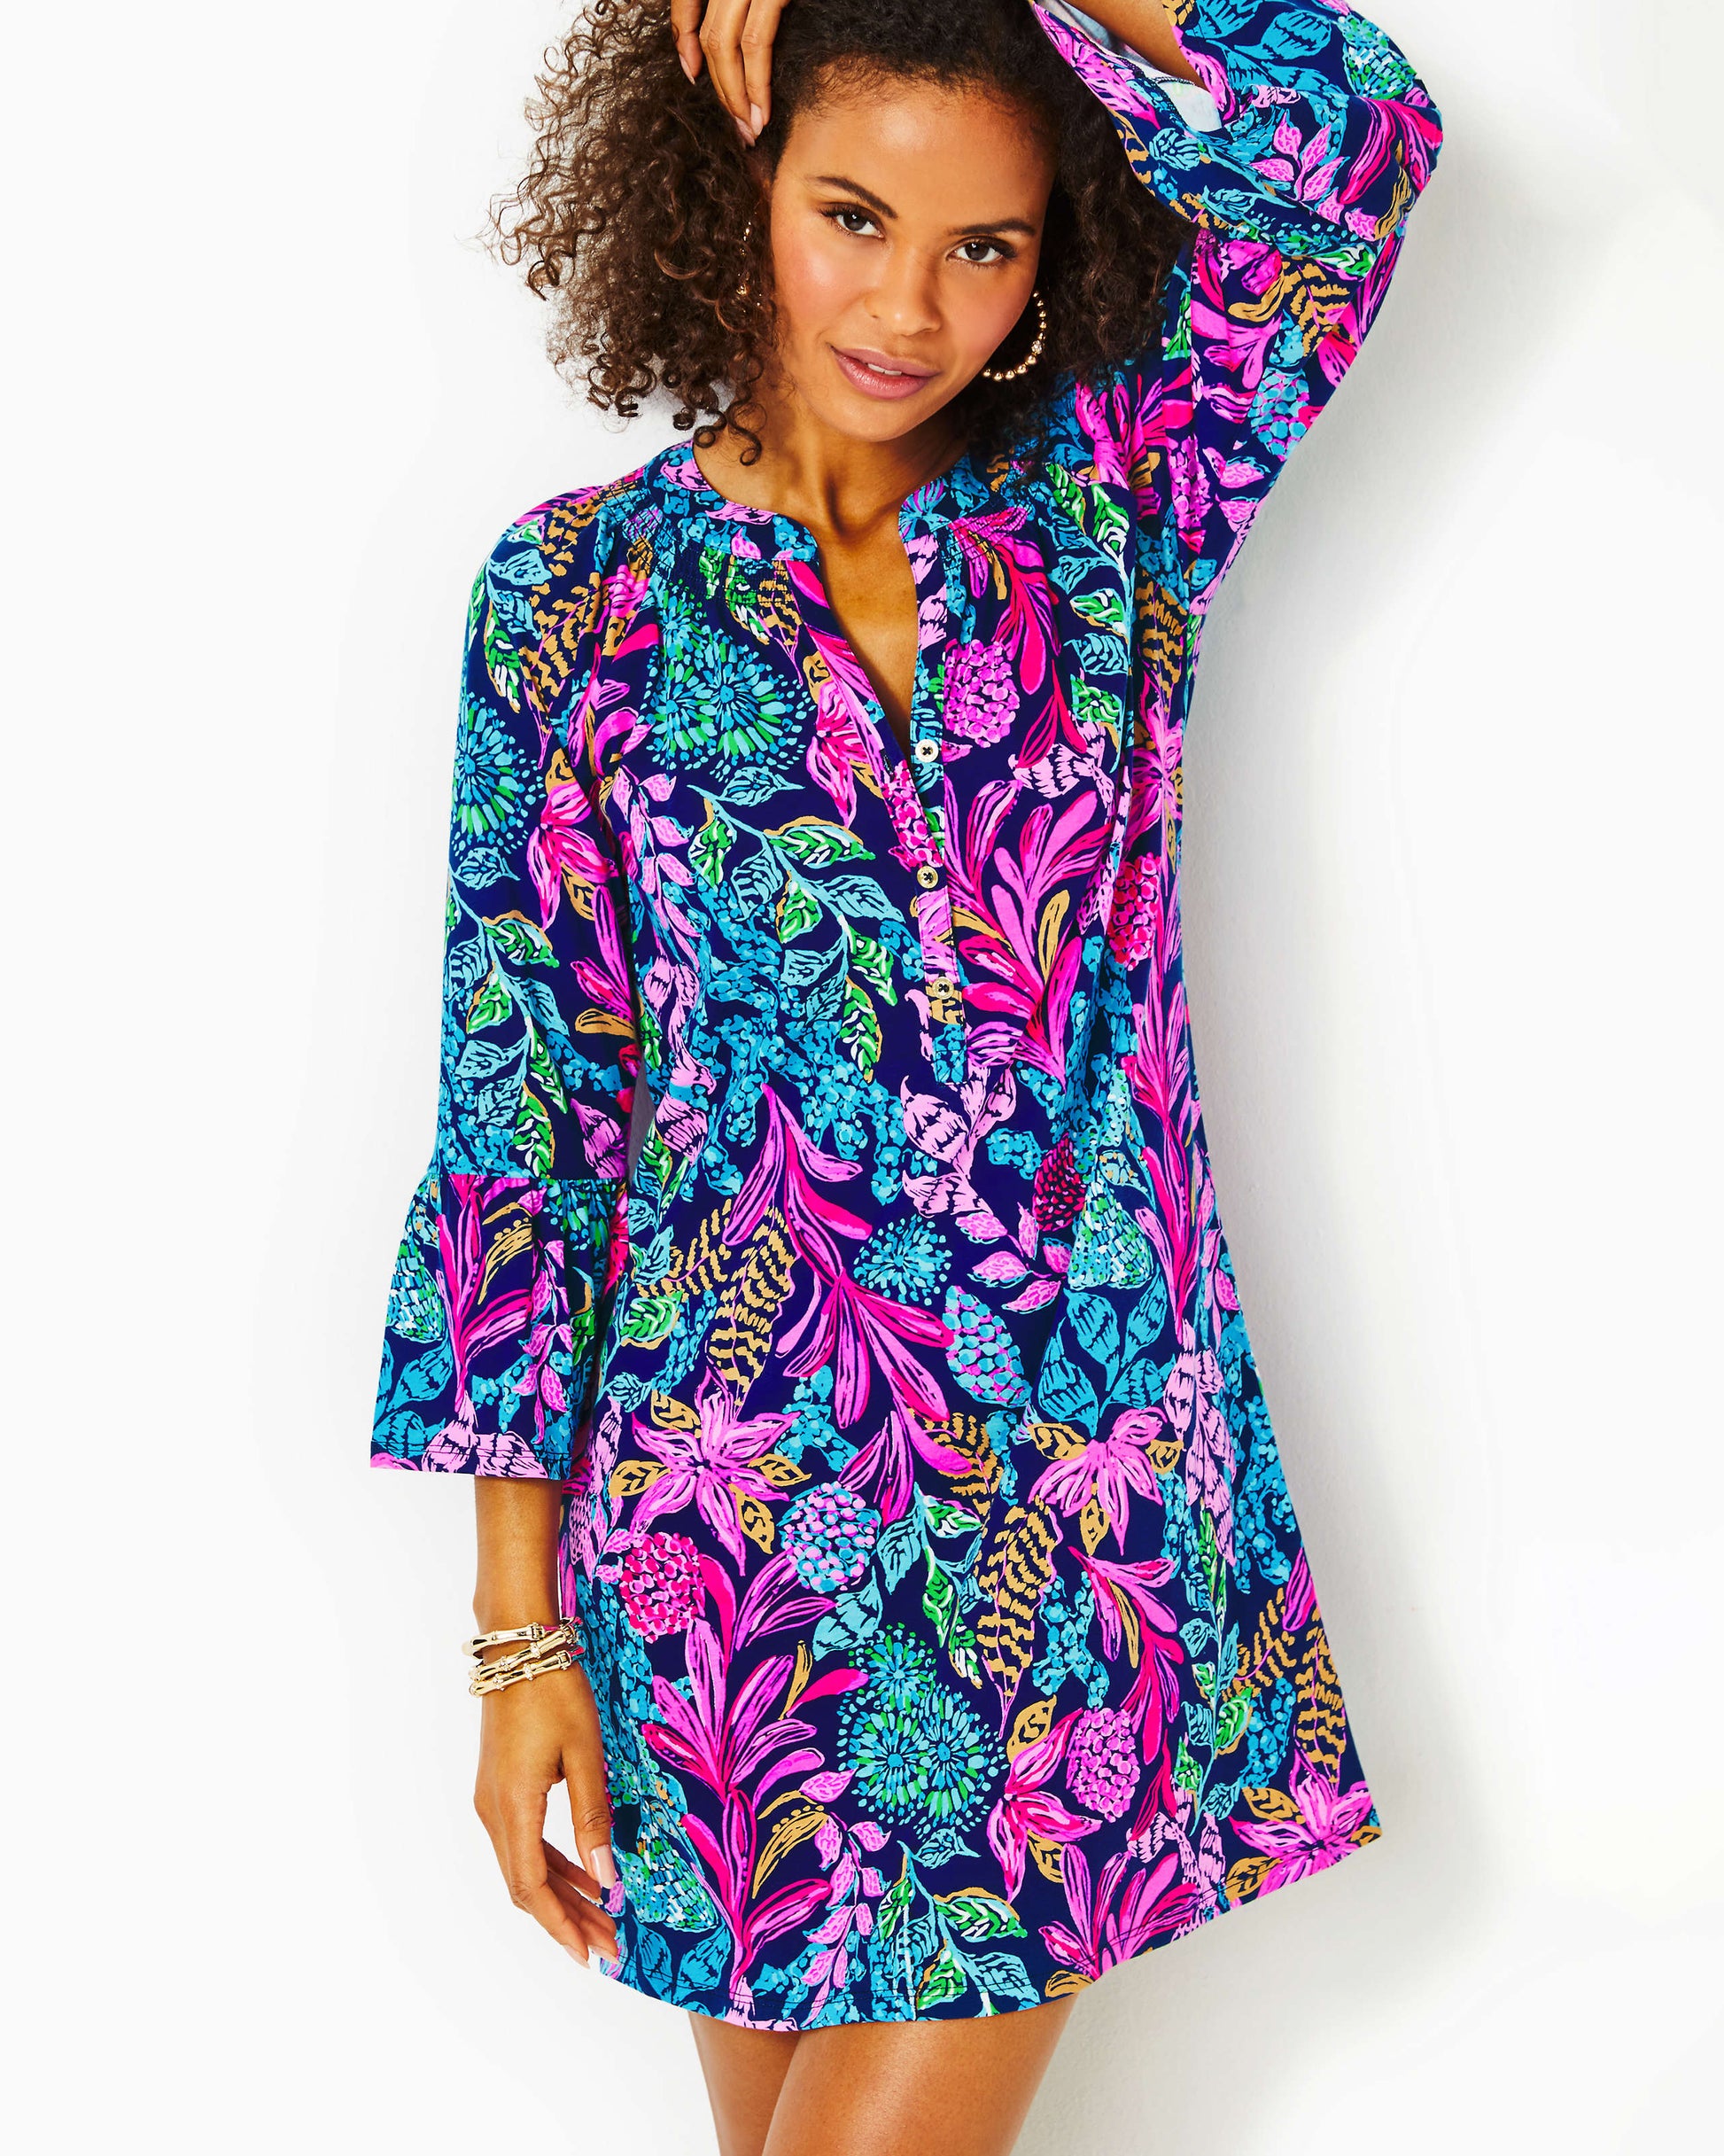 NORRIS 3/4 SLEEVE DRESS – Pink Sorbet | Lilly Pulitzer Store Columbia, SC